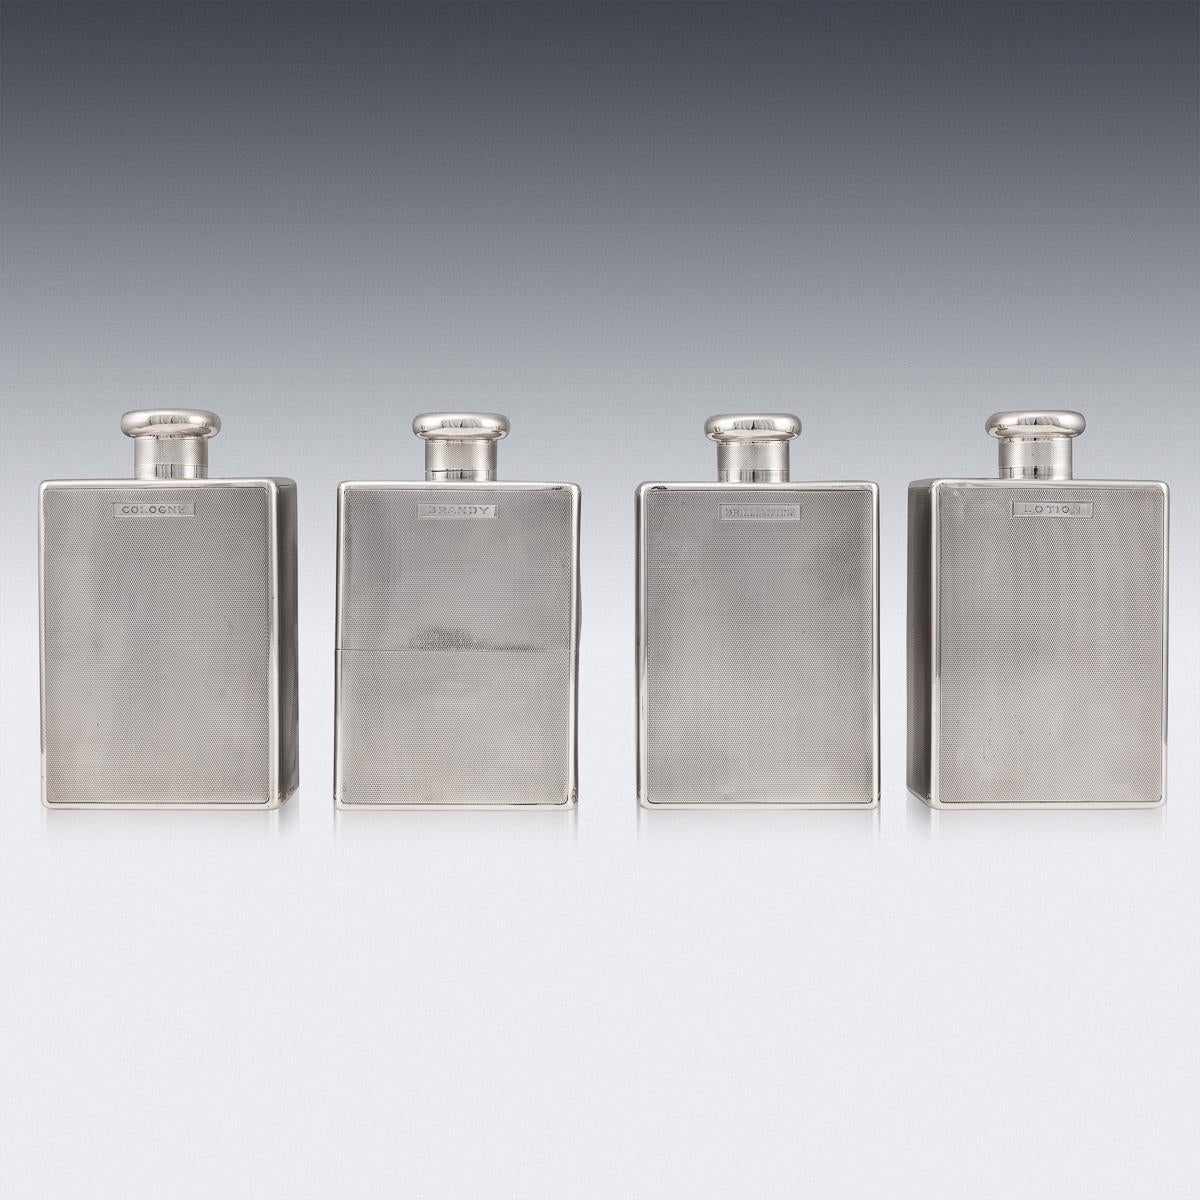 Antique 20th century Art Deco solid silver set of four gentleman's perfume bottles, with silver screw tops, engine turned decoration and engraved; Cologne, Brandy, Brilliantine, Lotion. Hallmarked English silver (925 standard), London, year 1922